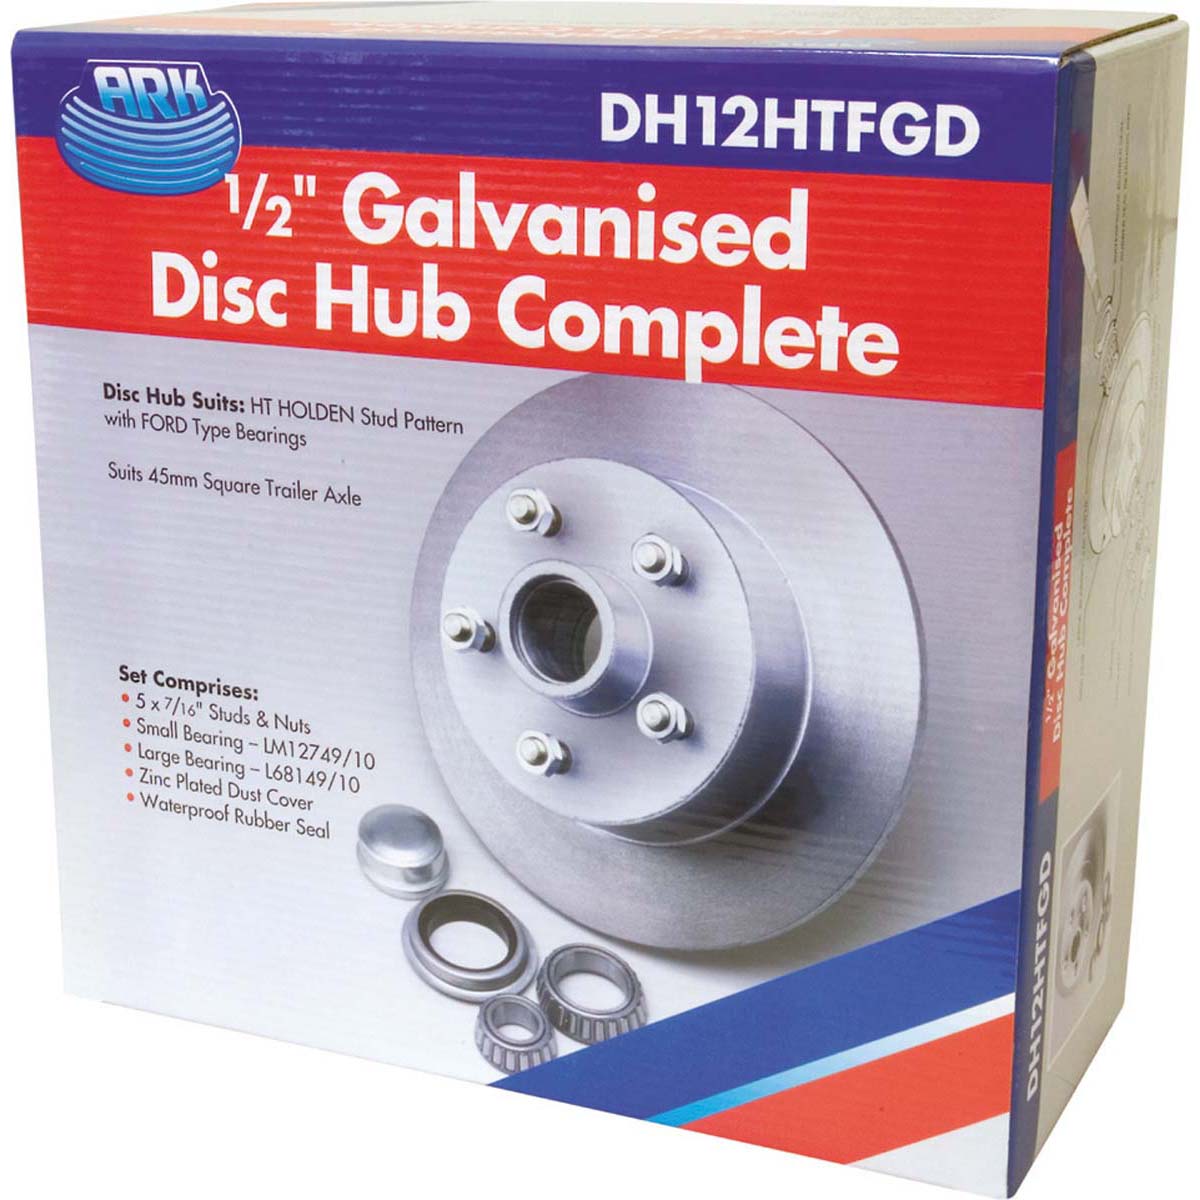 ARK Galvanised Disc Hub to suit Holden HT 0.5in